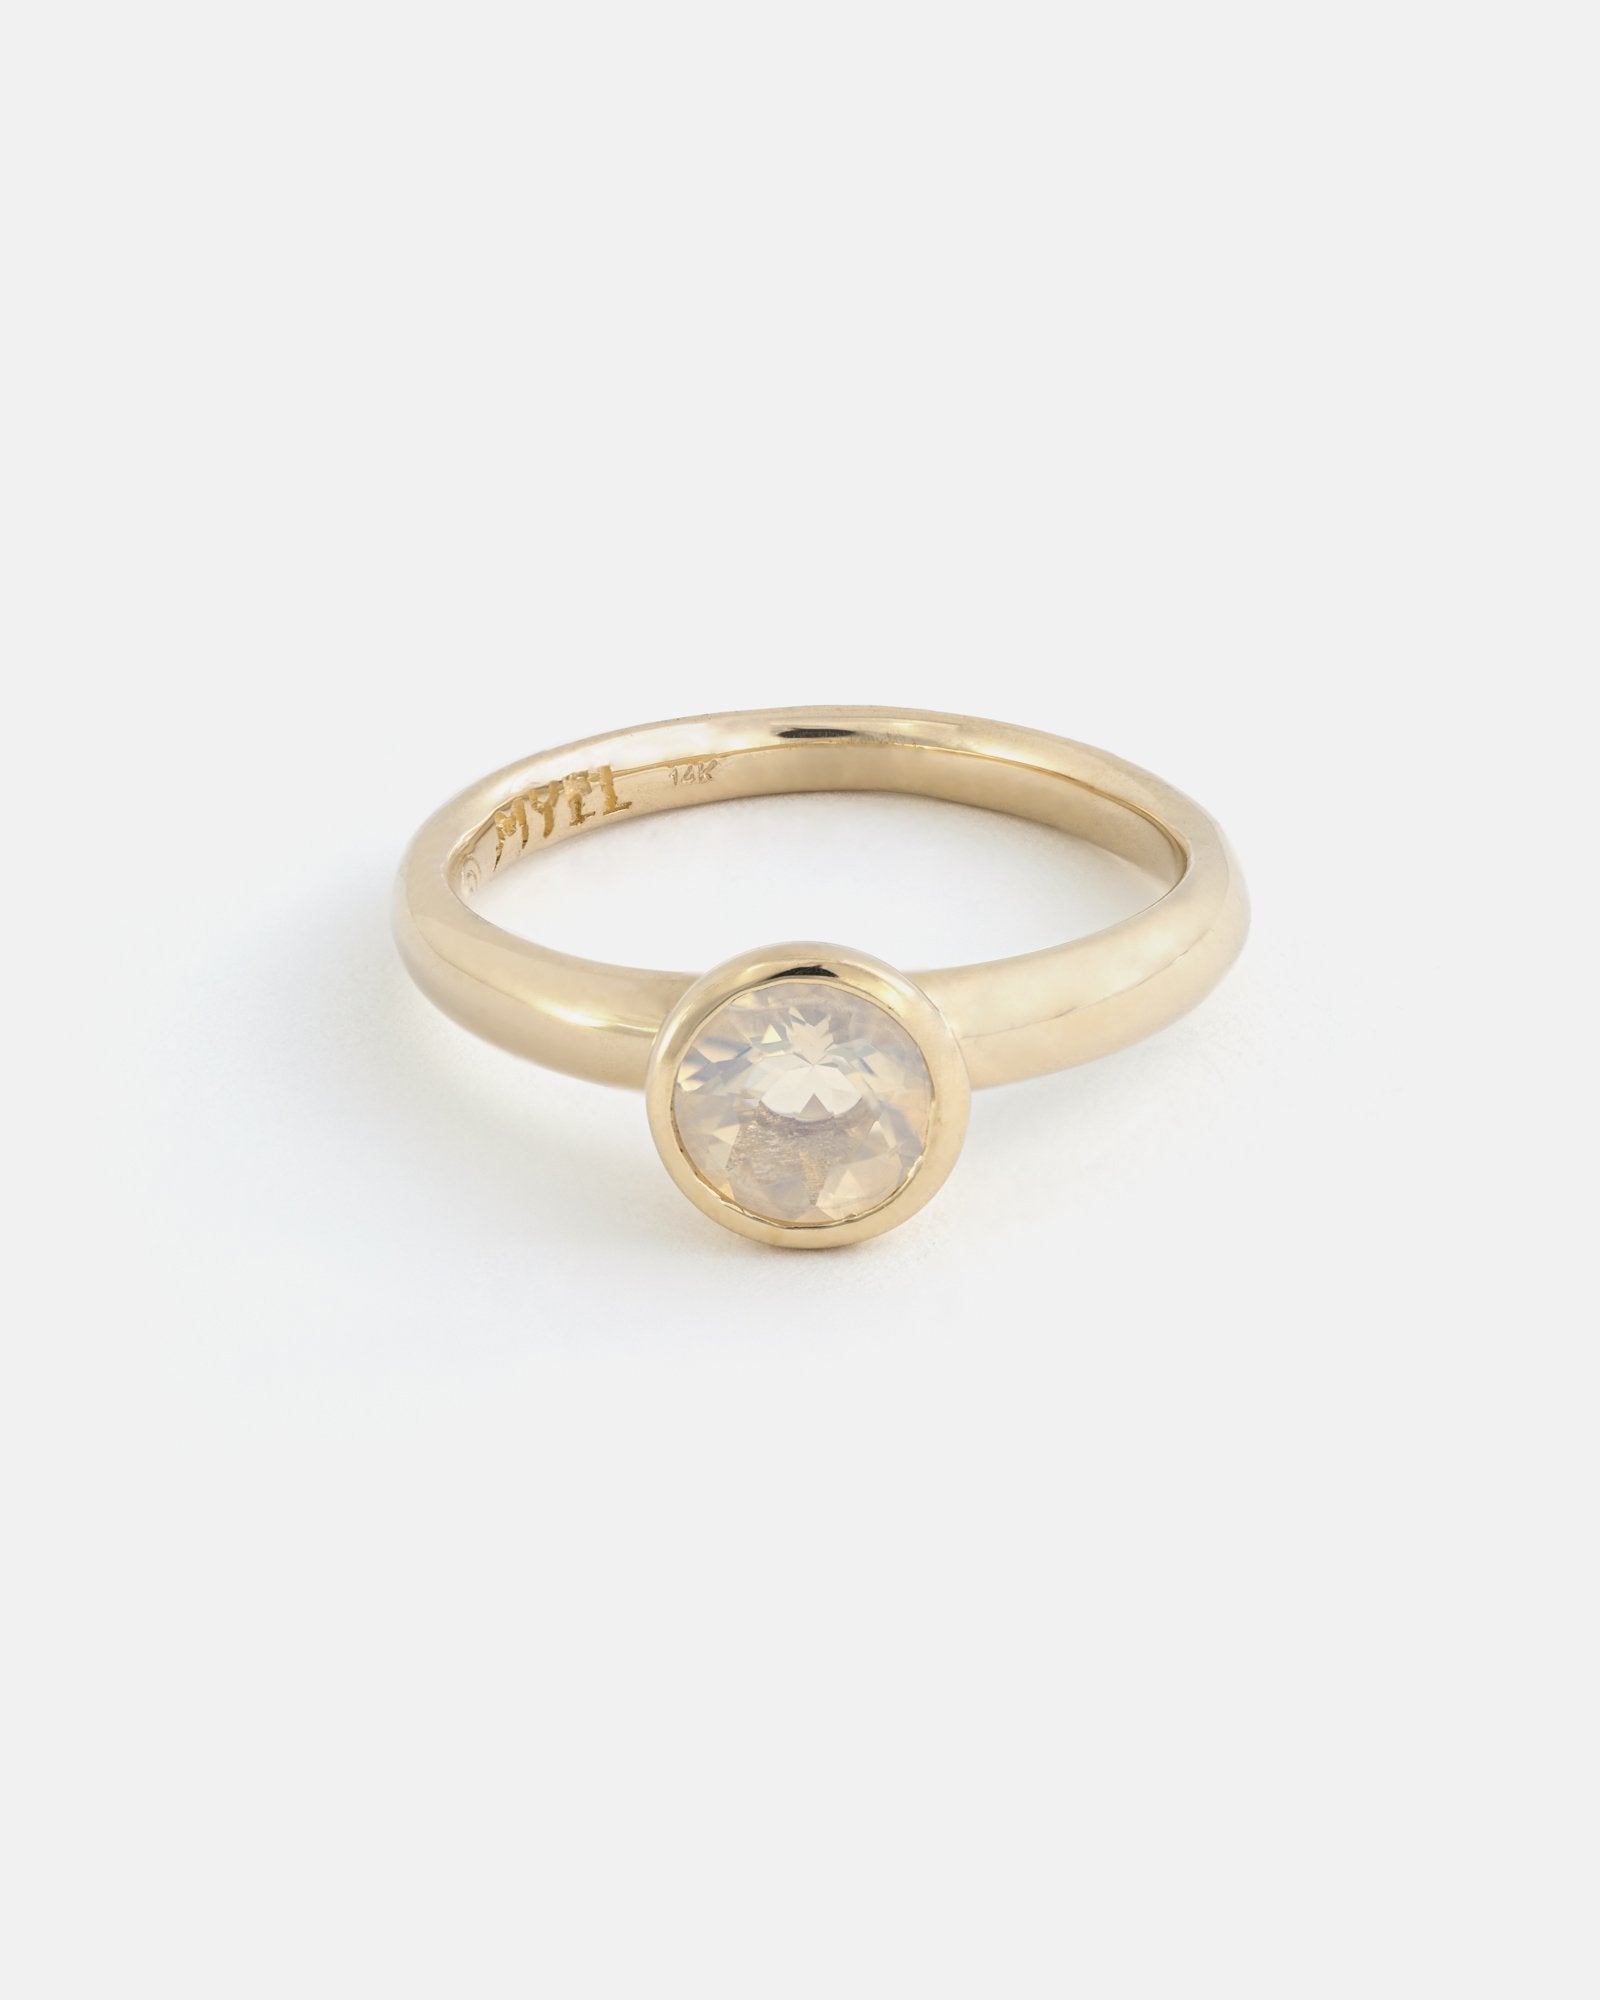 Round Vara Ring in Fairmined Gold with Oregon Opal